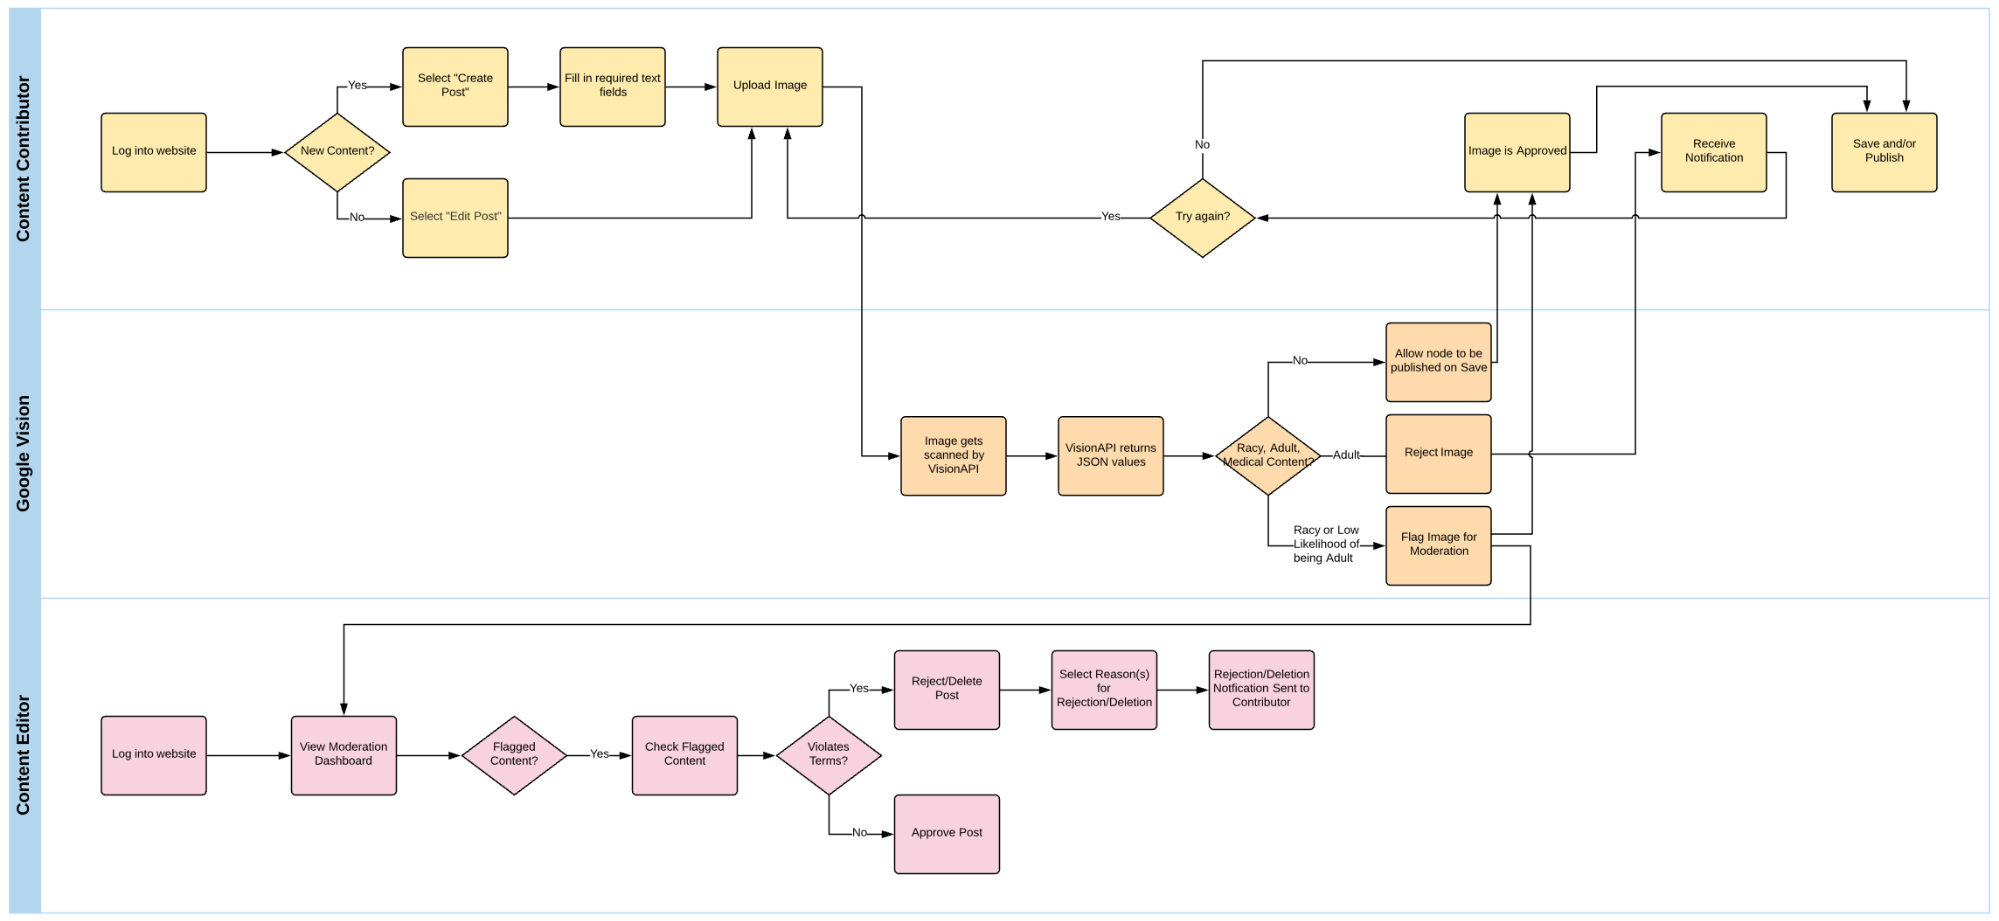 Logic flow diagram of a content moderation workflow incorporating Google's VisionAPI